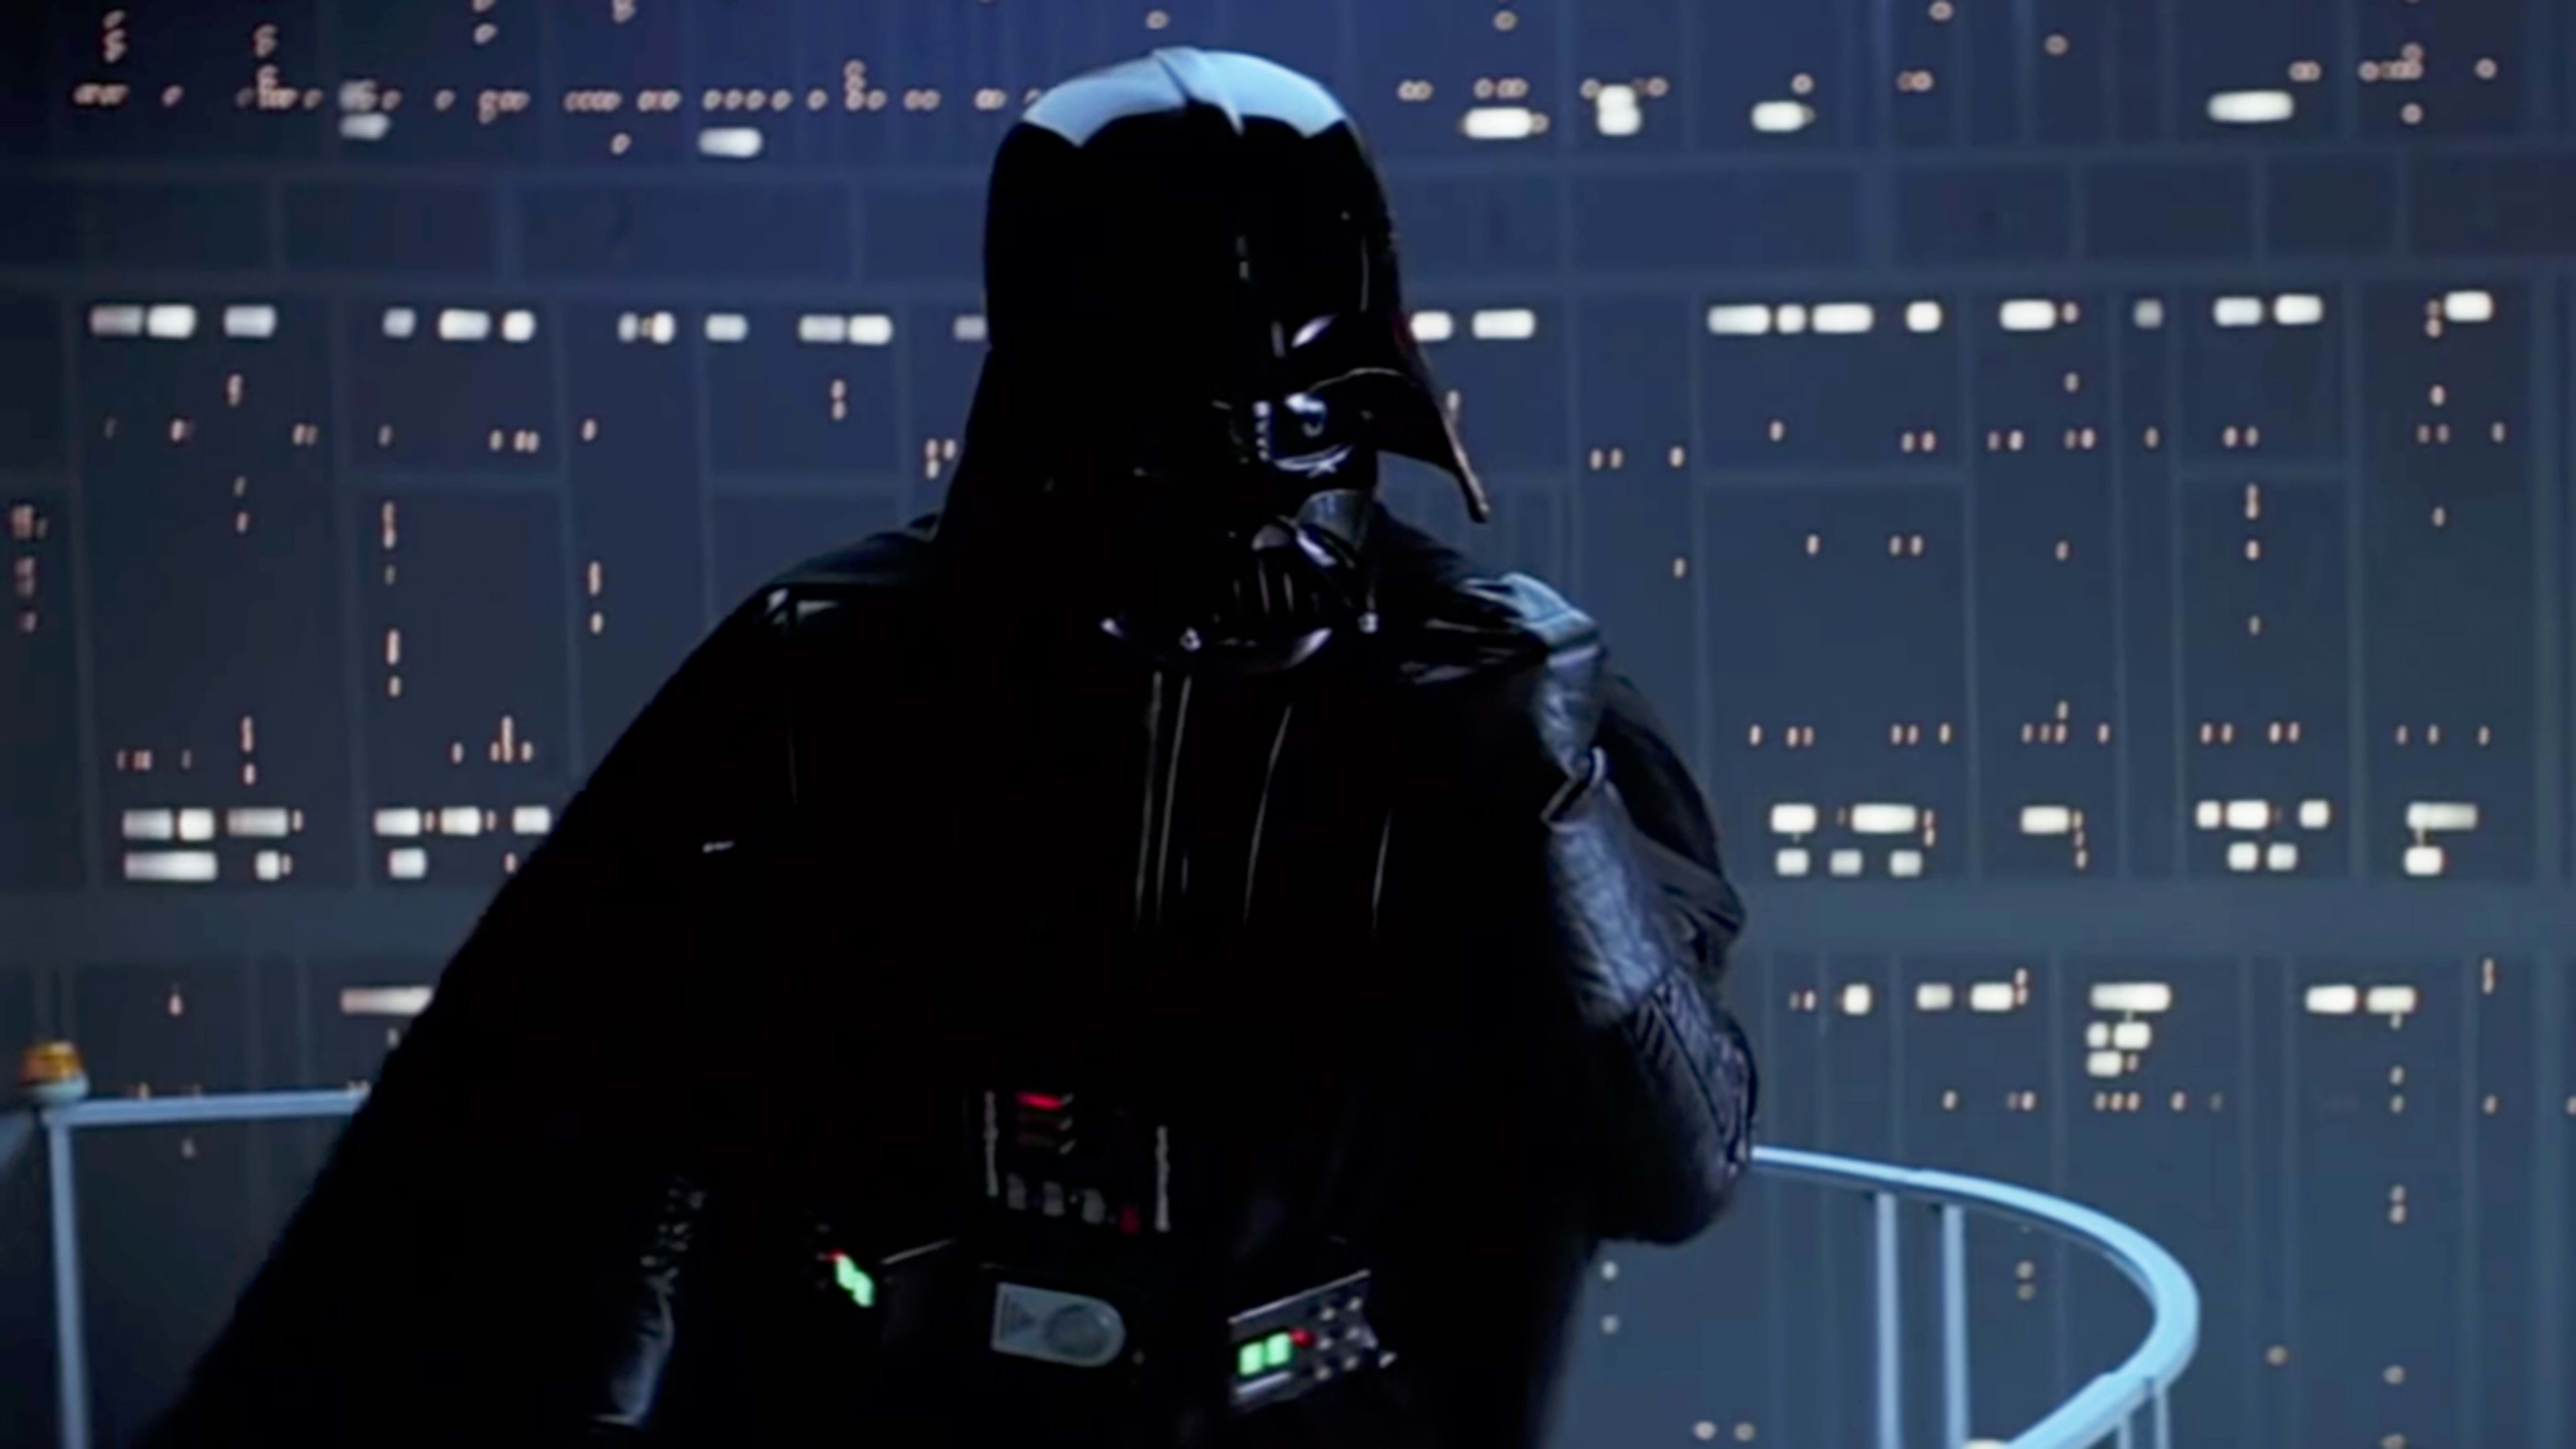 How Darth Vader became the most iconic evil figure in film history